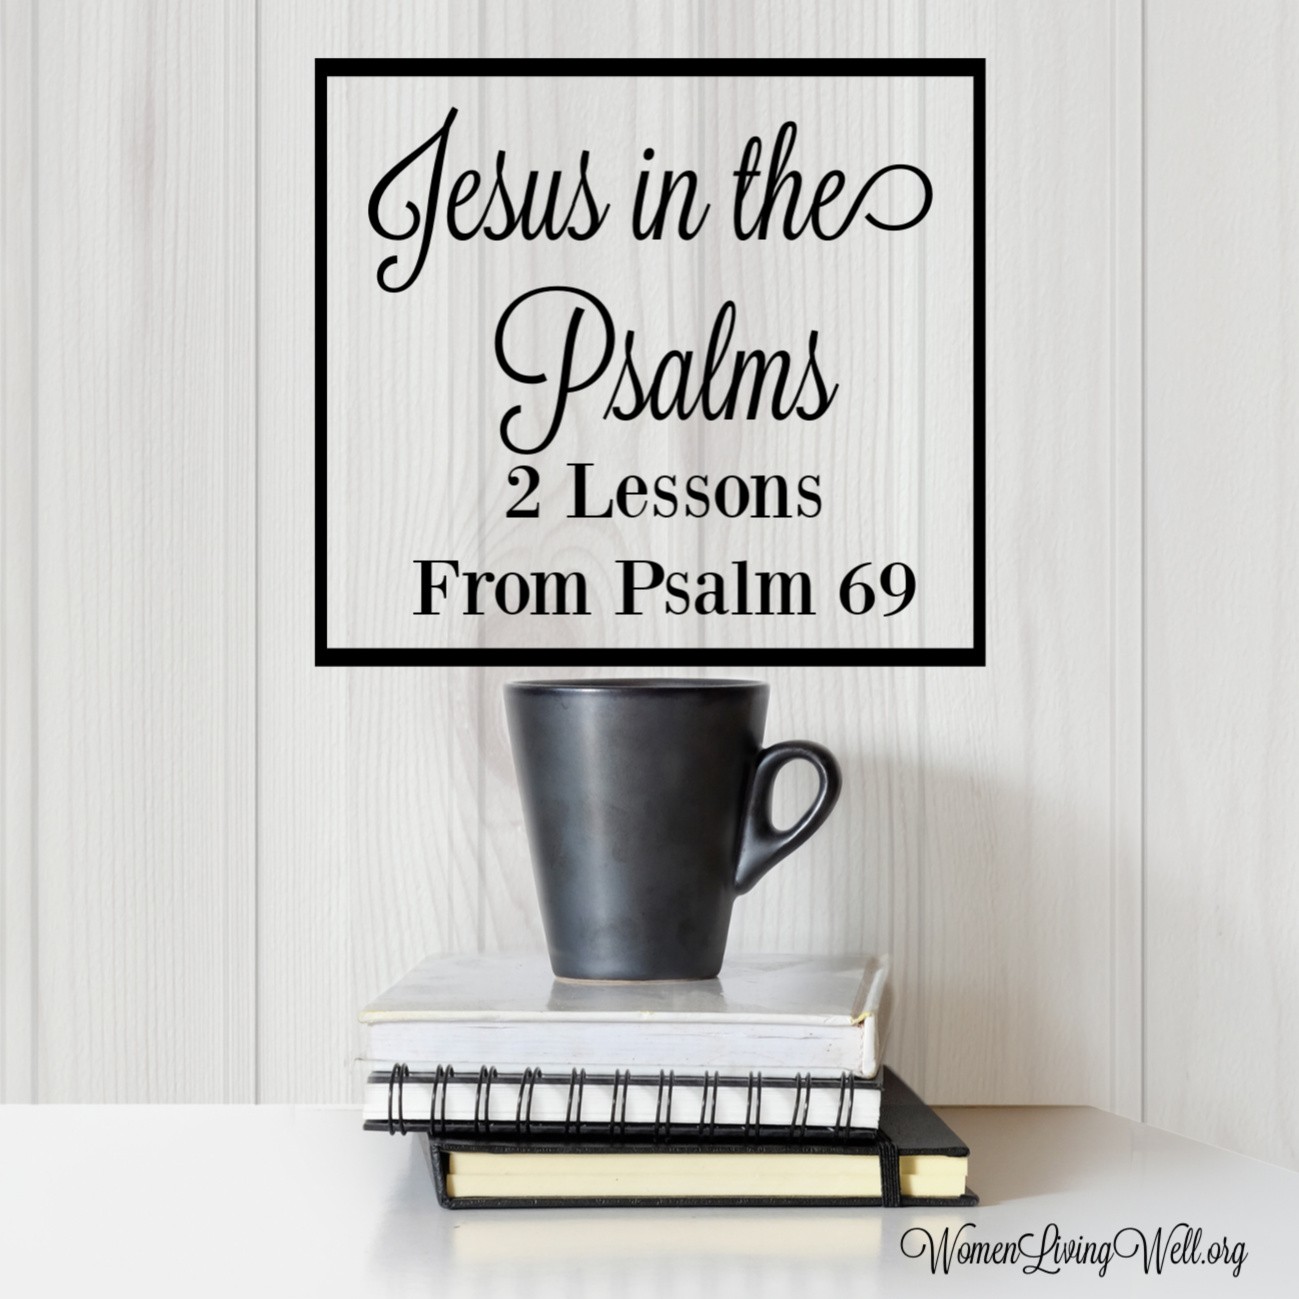 Jesus in the Psalms: 2 Lessons From Psalm 69 - Women Living Well